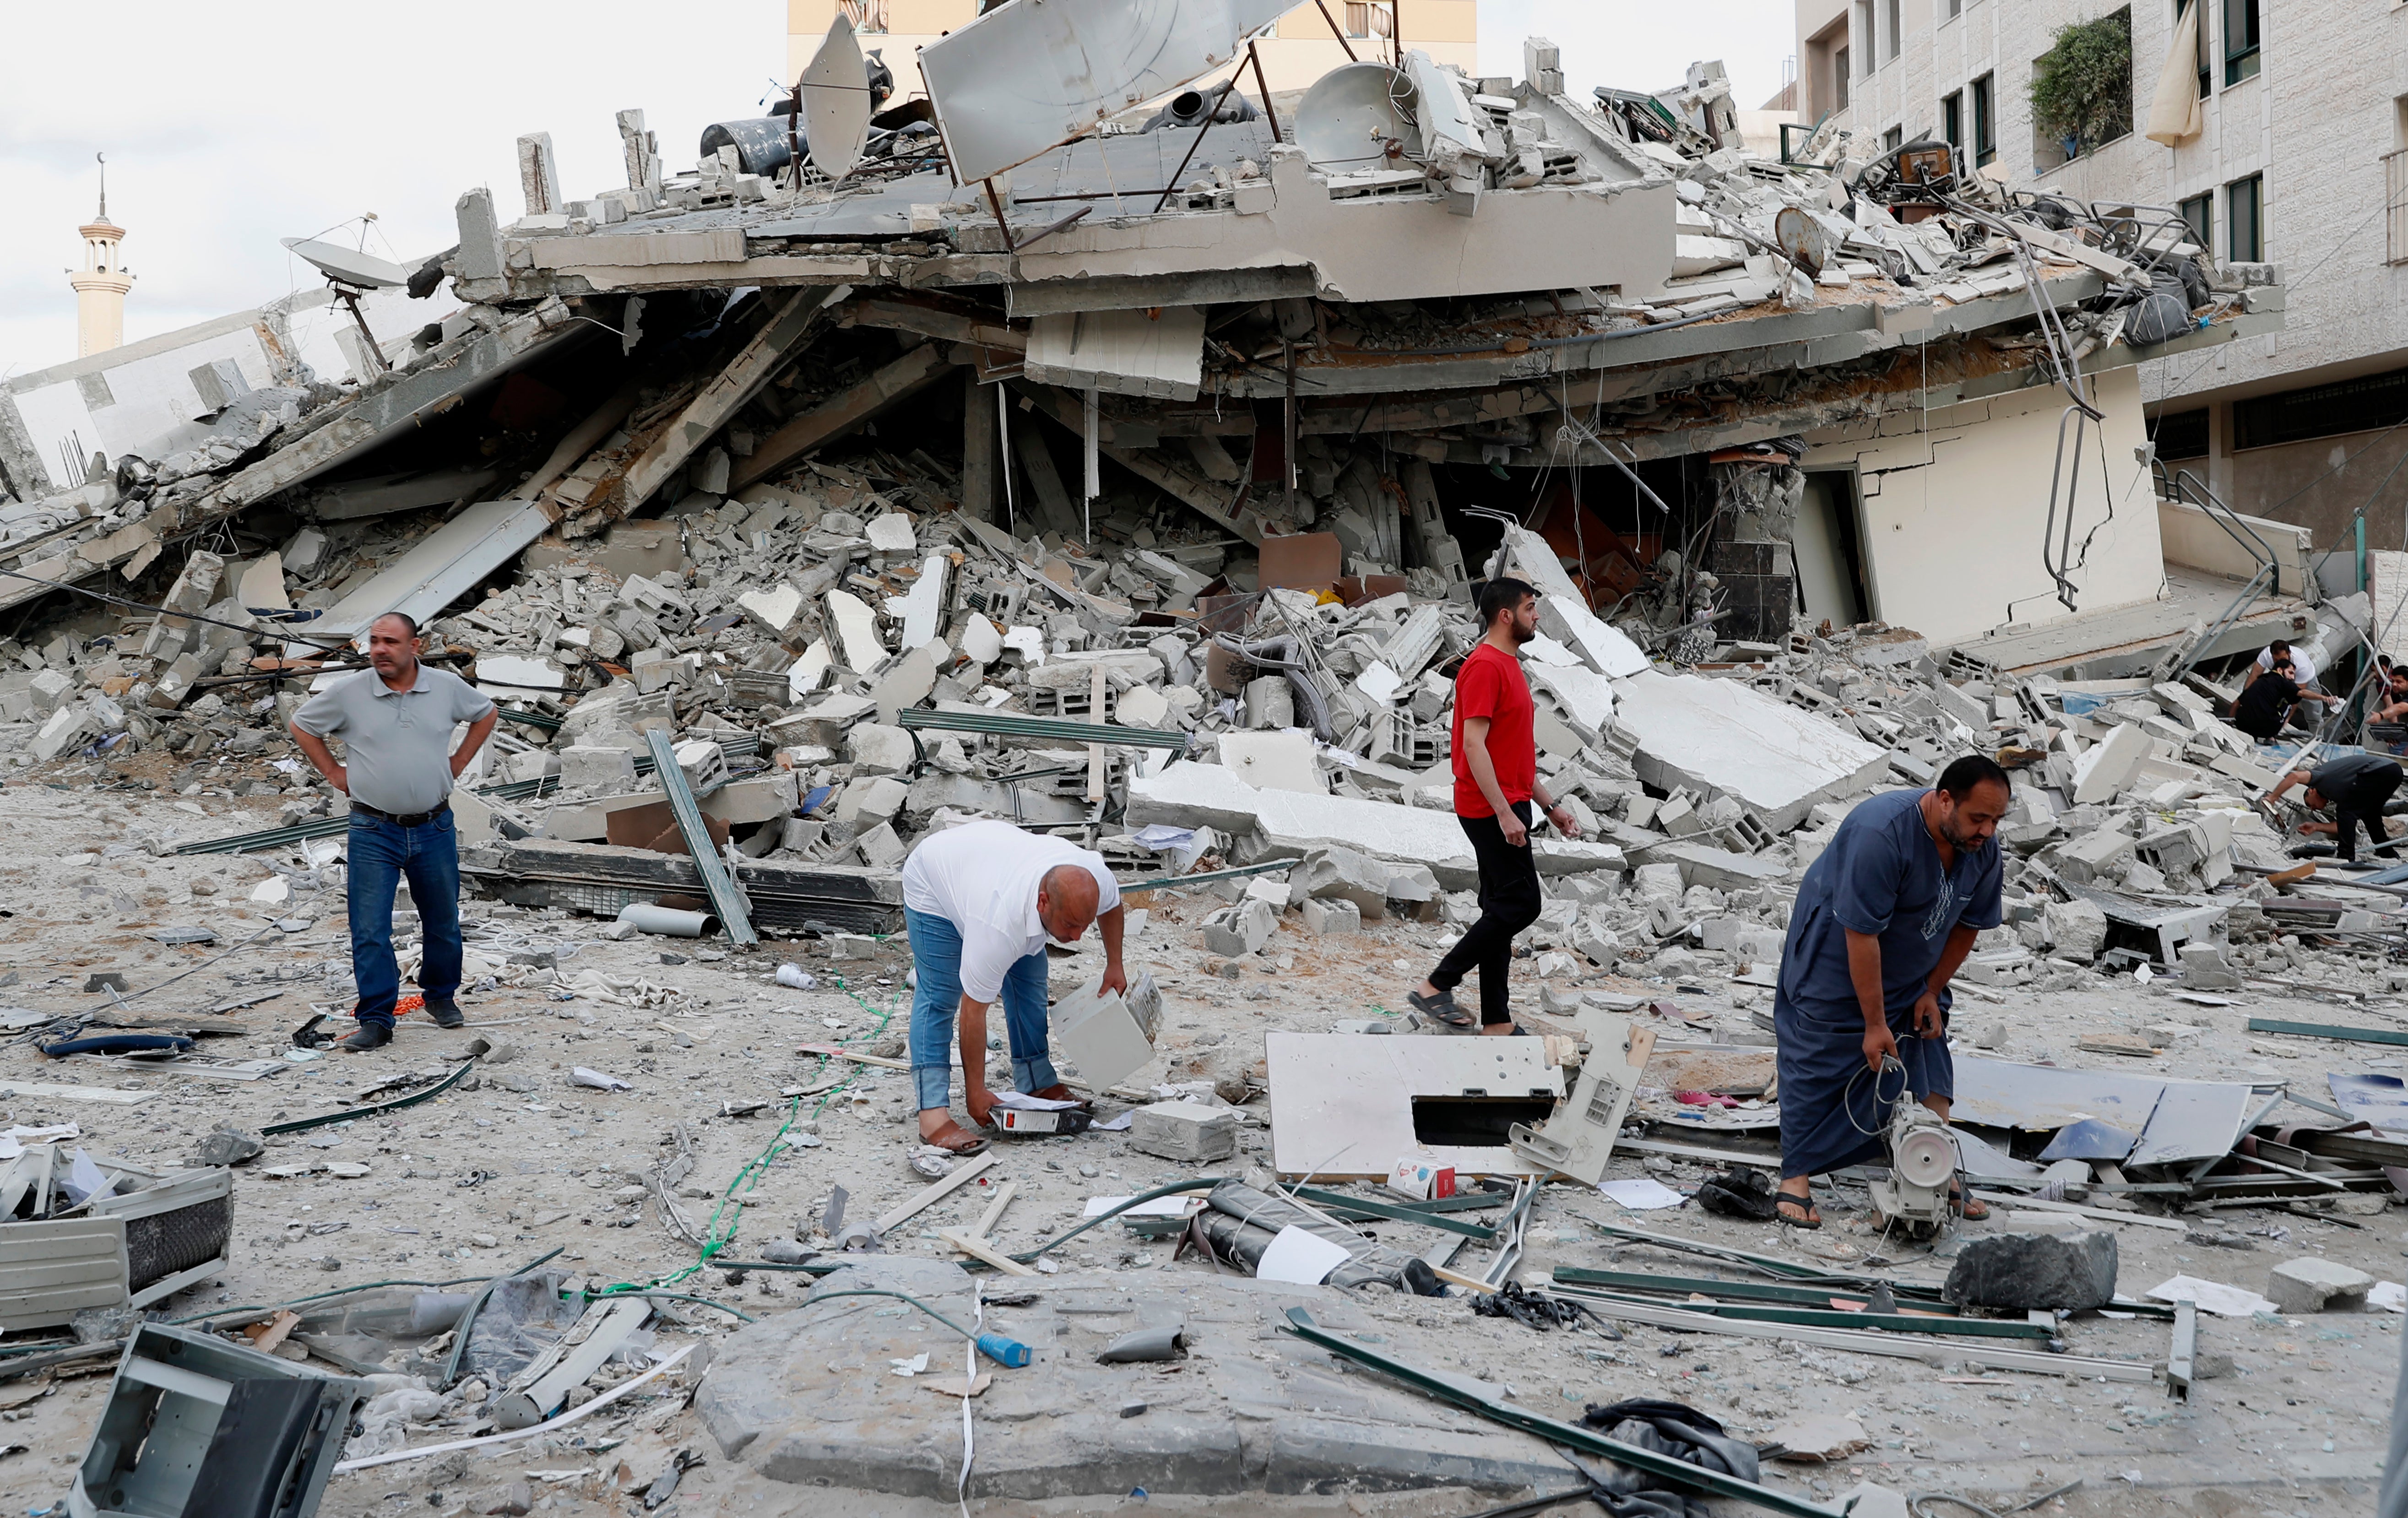 People inspect the rubble of destroyed residential building that was hit by an Israeli airstrike, in Gaza City, Monday, May 17, 2021